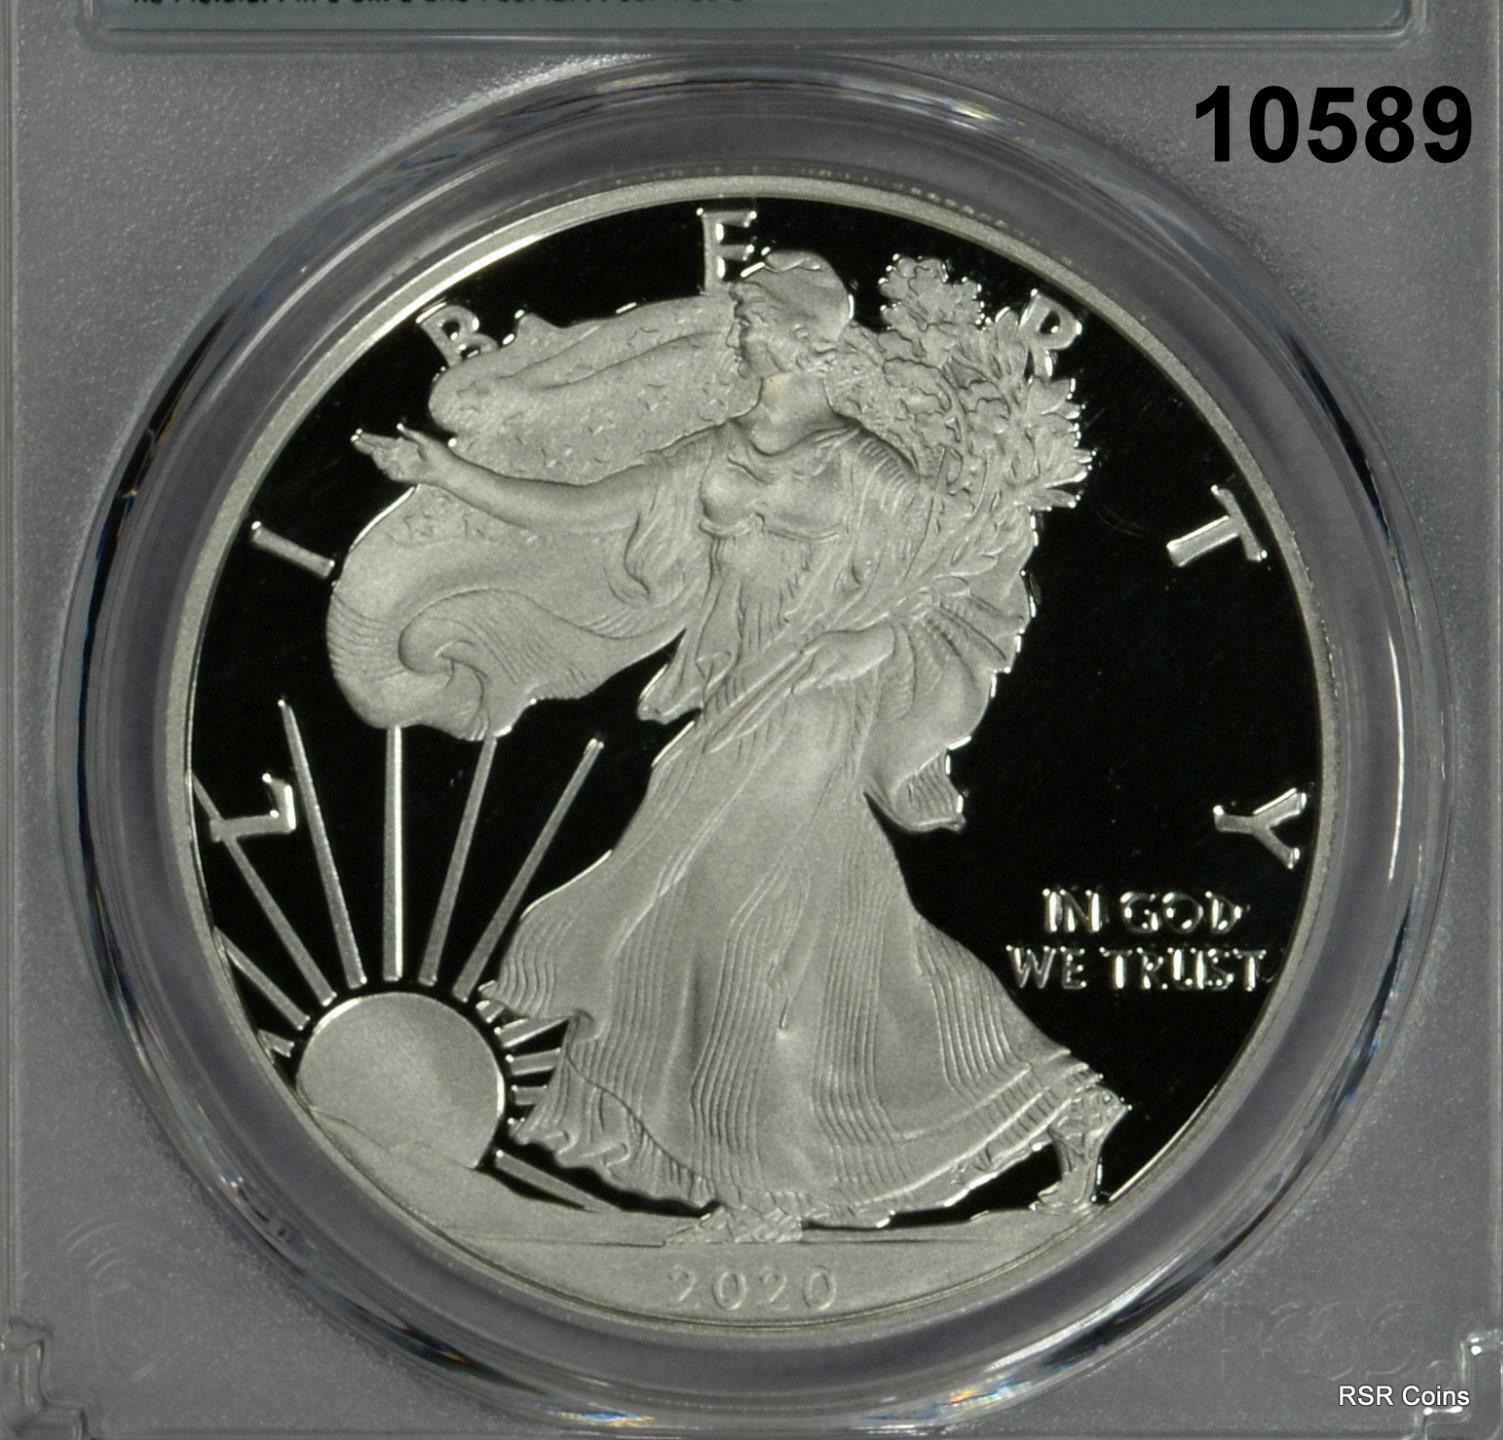 2020 S SILVER EAGLE FIRST STRIKE PCGS CERTIFIED PR70 DCAM PERFECT! #10589